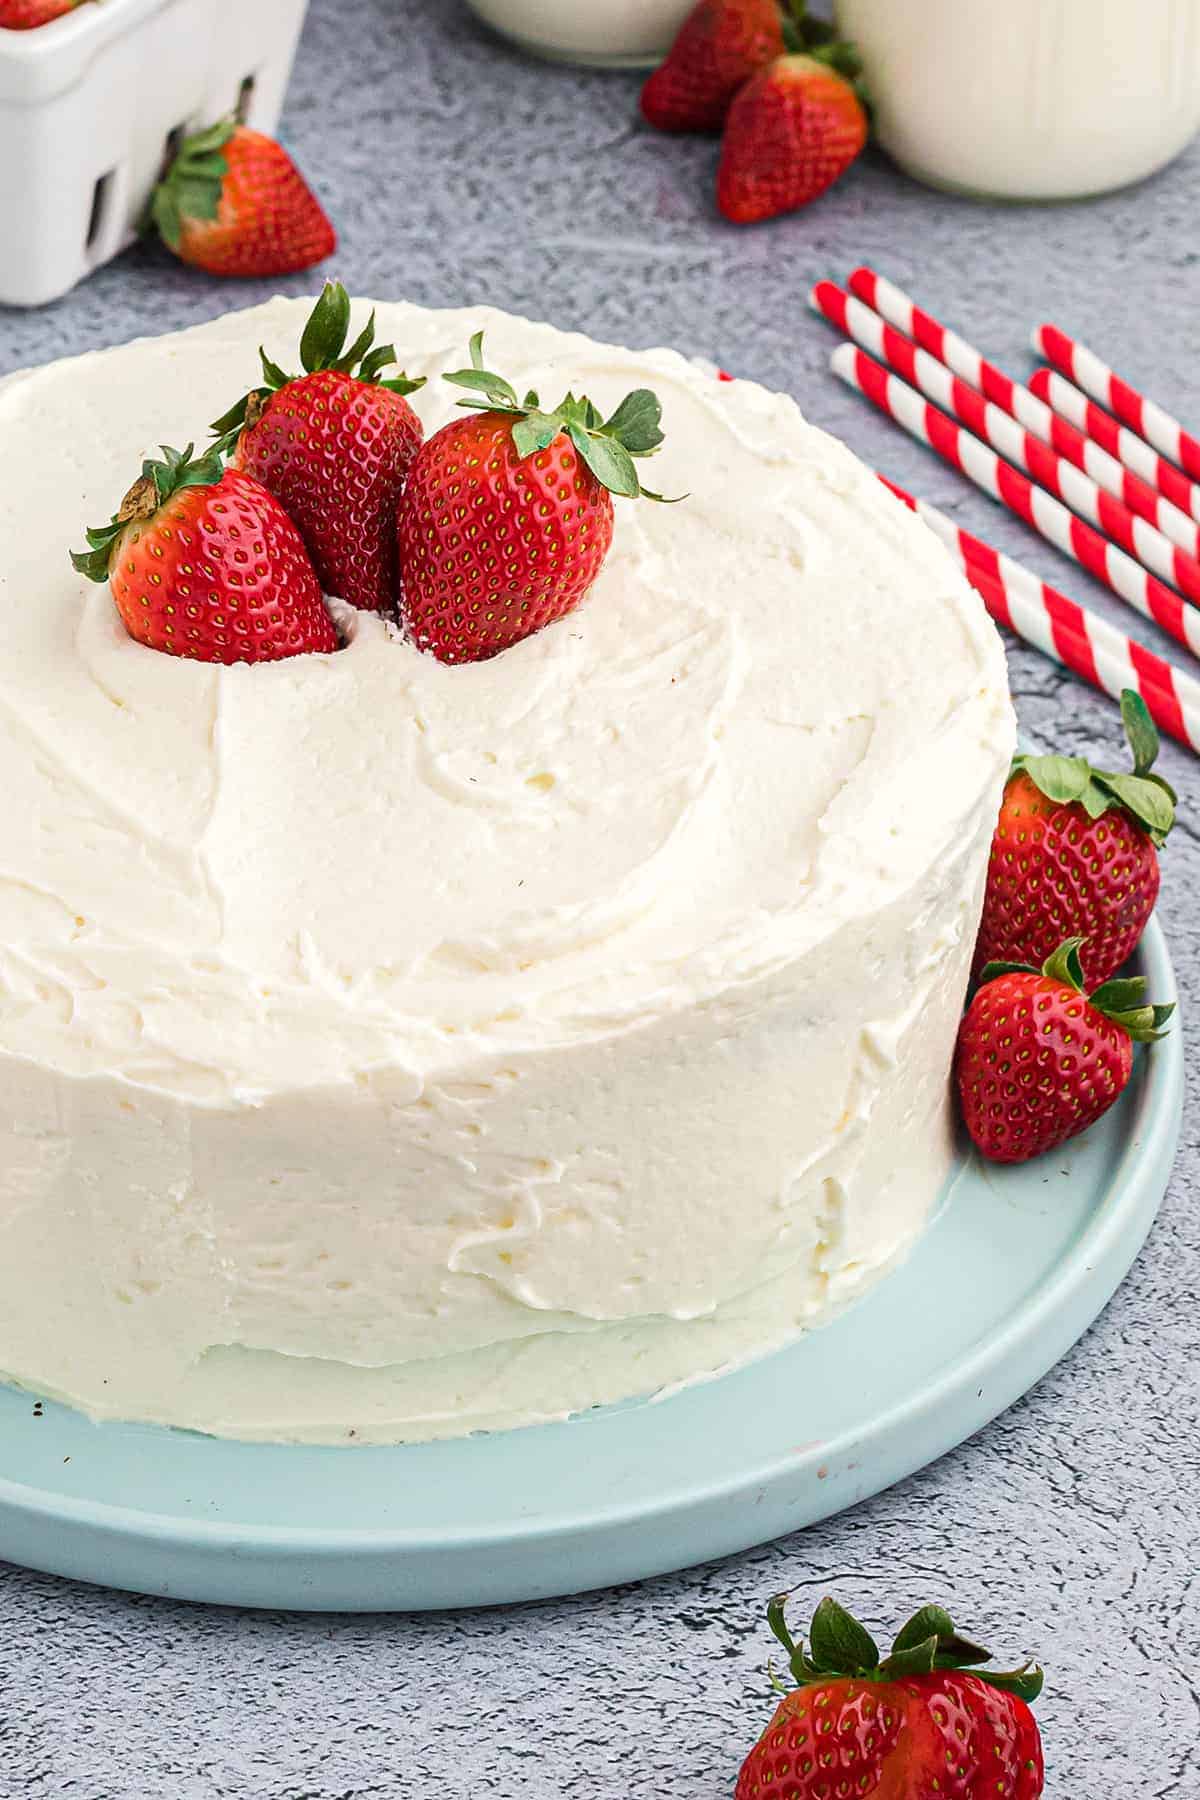 Whipped Cream Frosting Recipe - How to Make Whipped Cake Icing